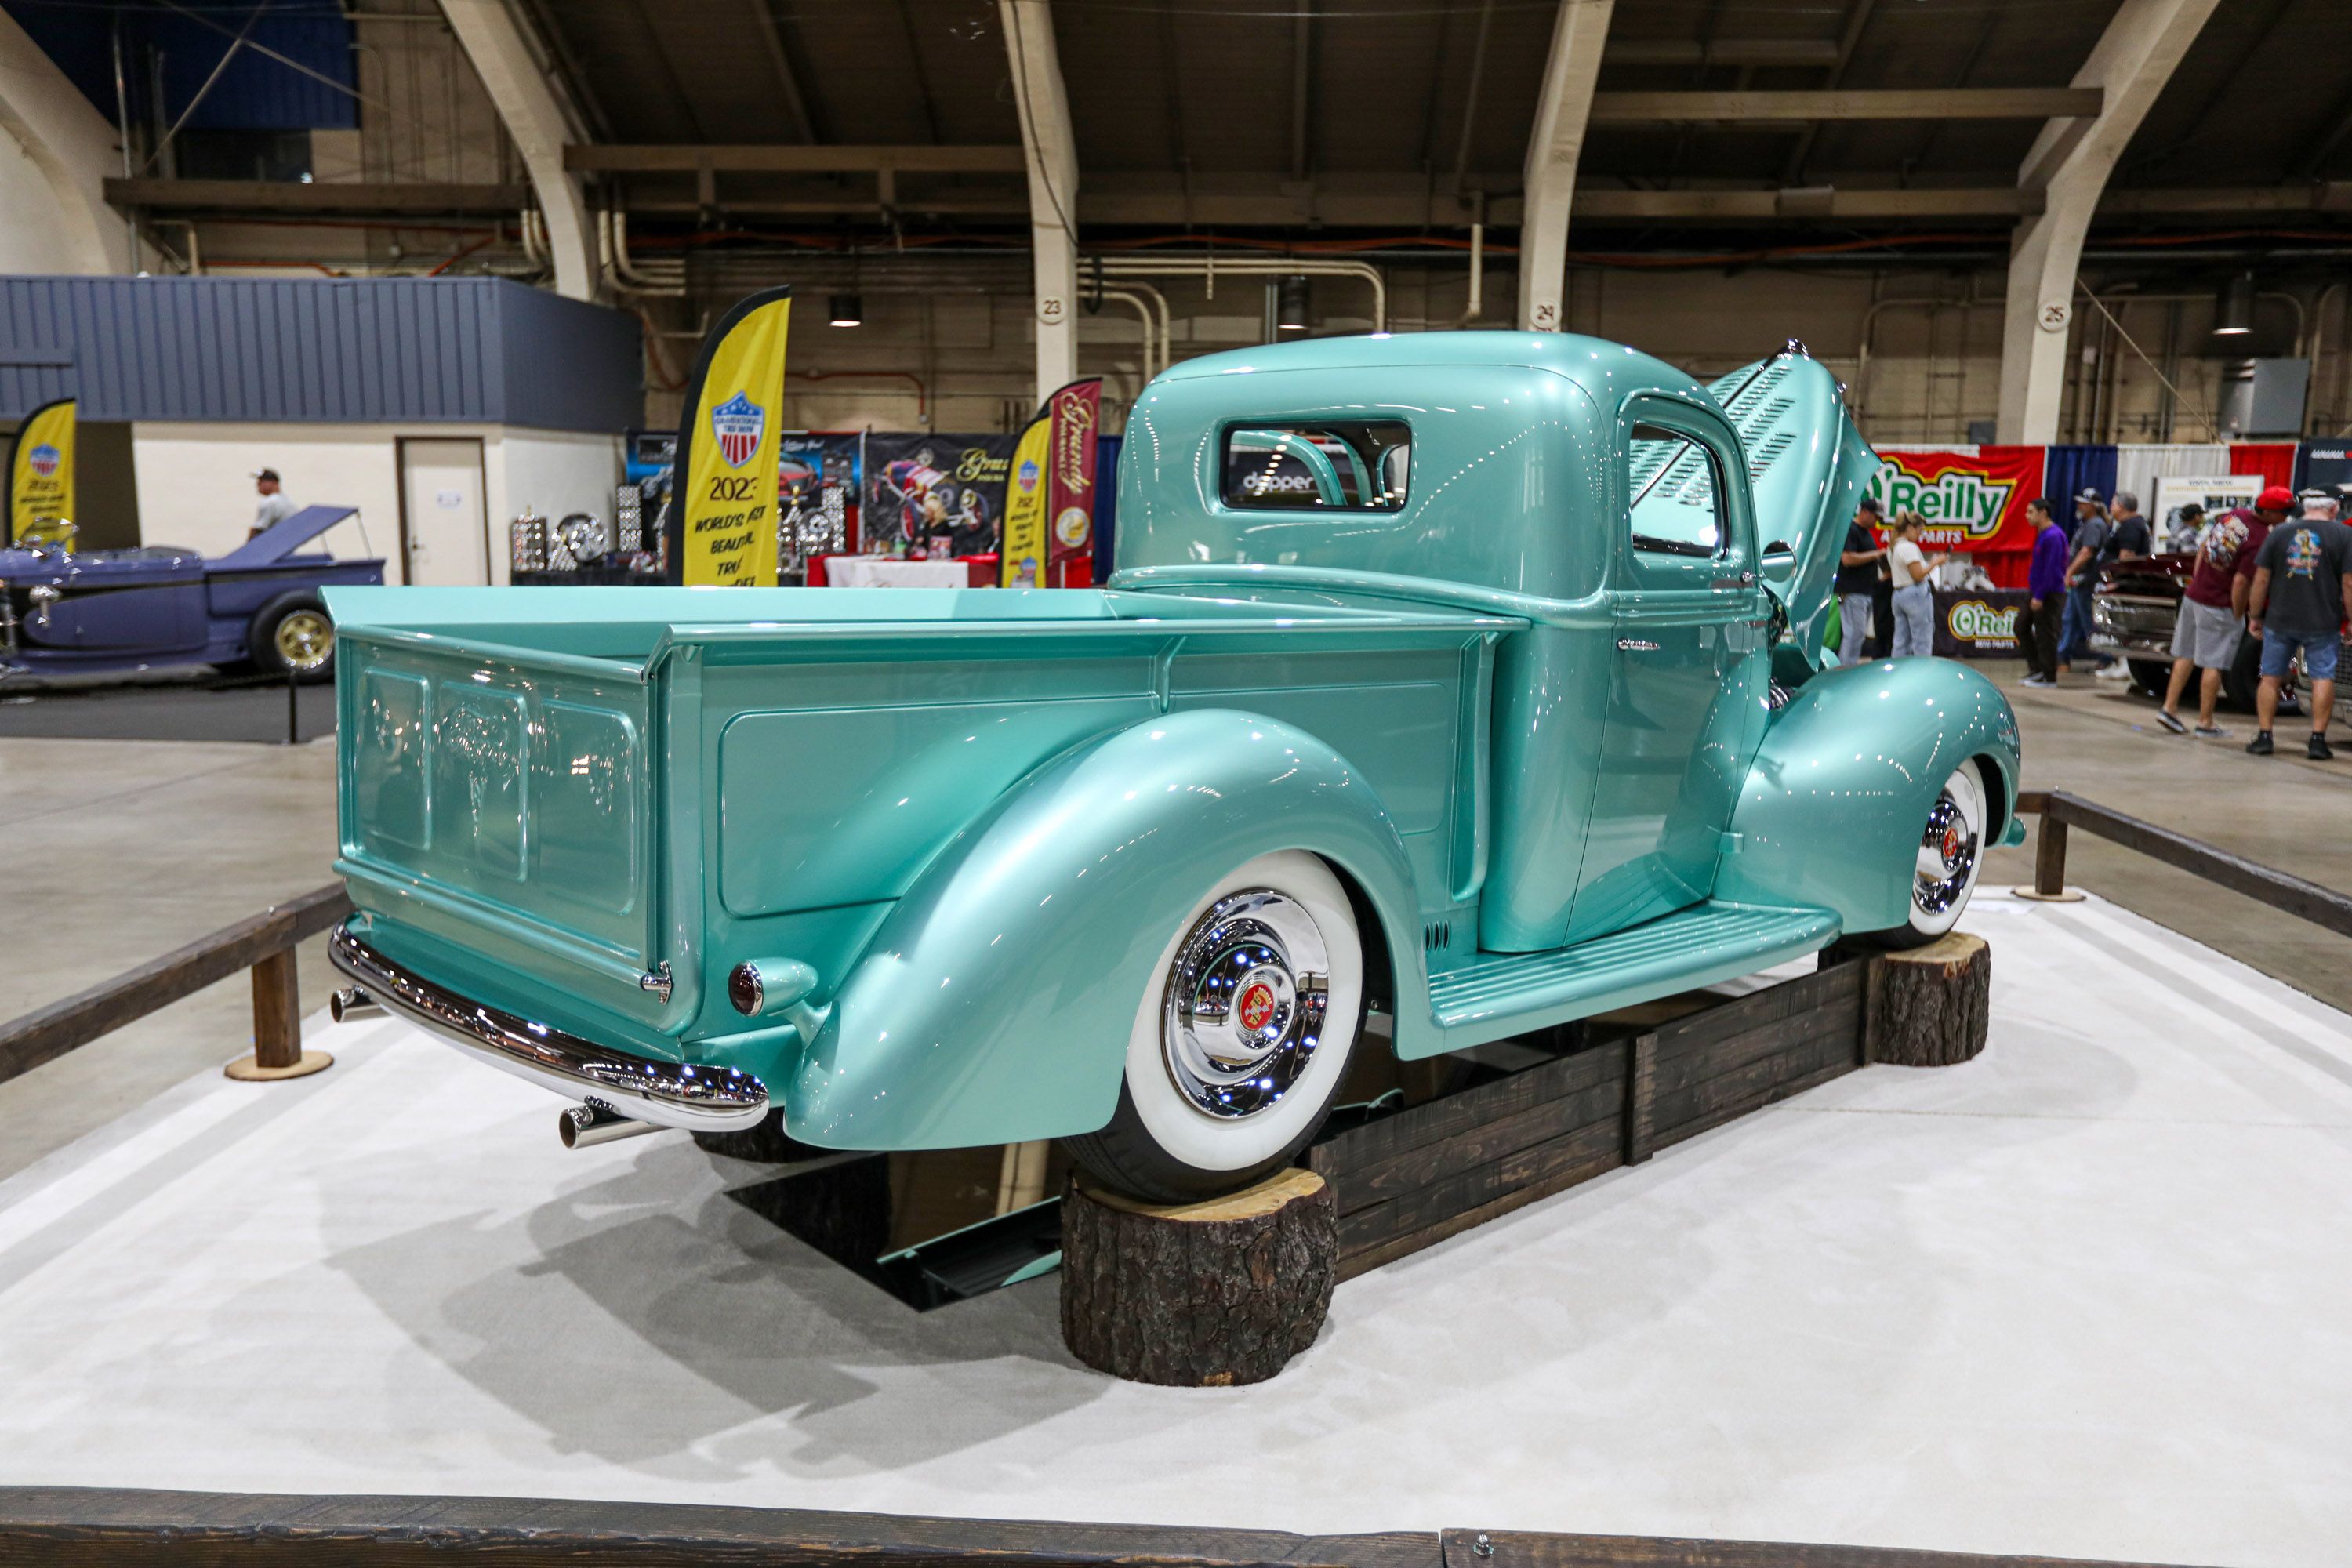 Stunningly Striking in Gorgeous Blue: The 1940 Ford Claims Title of World’s Most Exquisite Truck